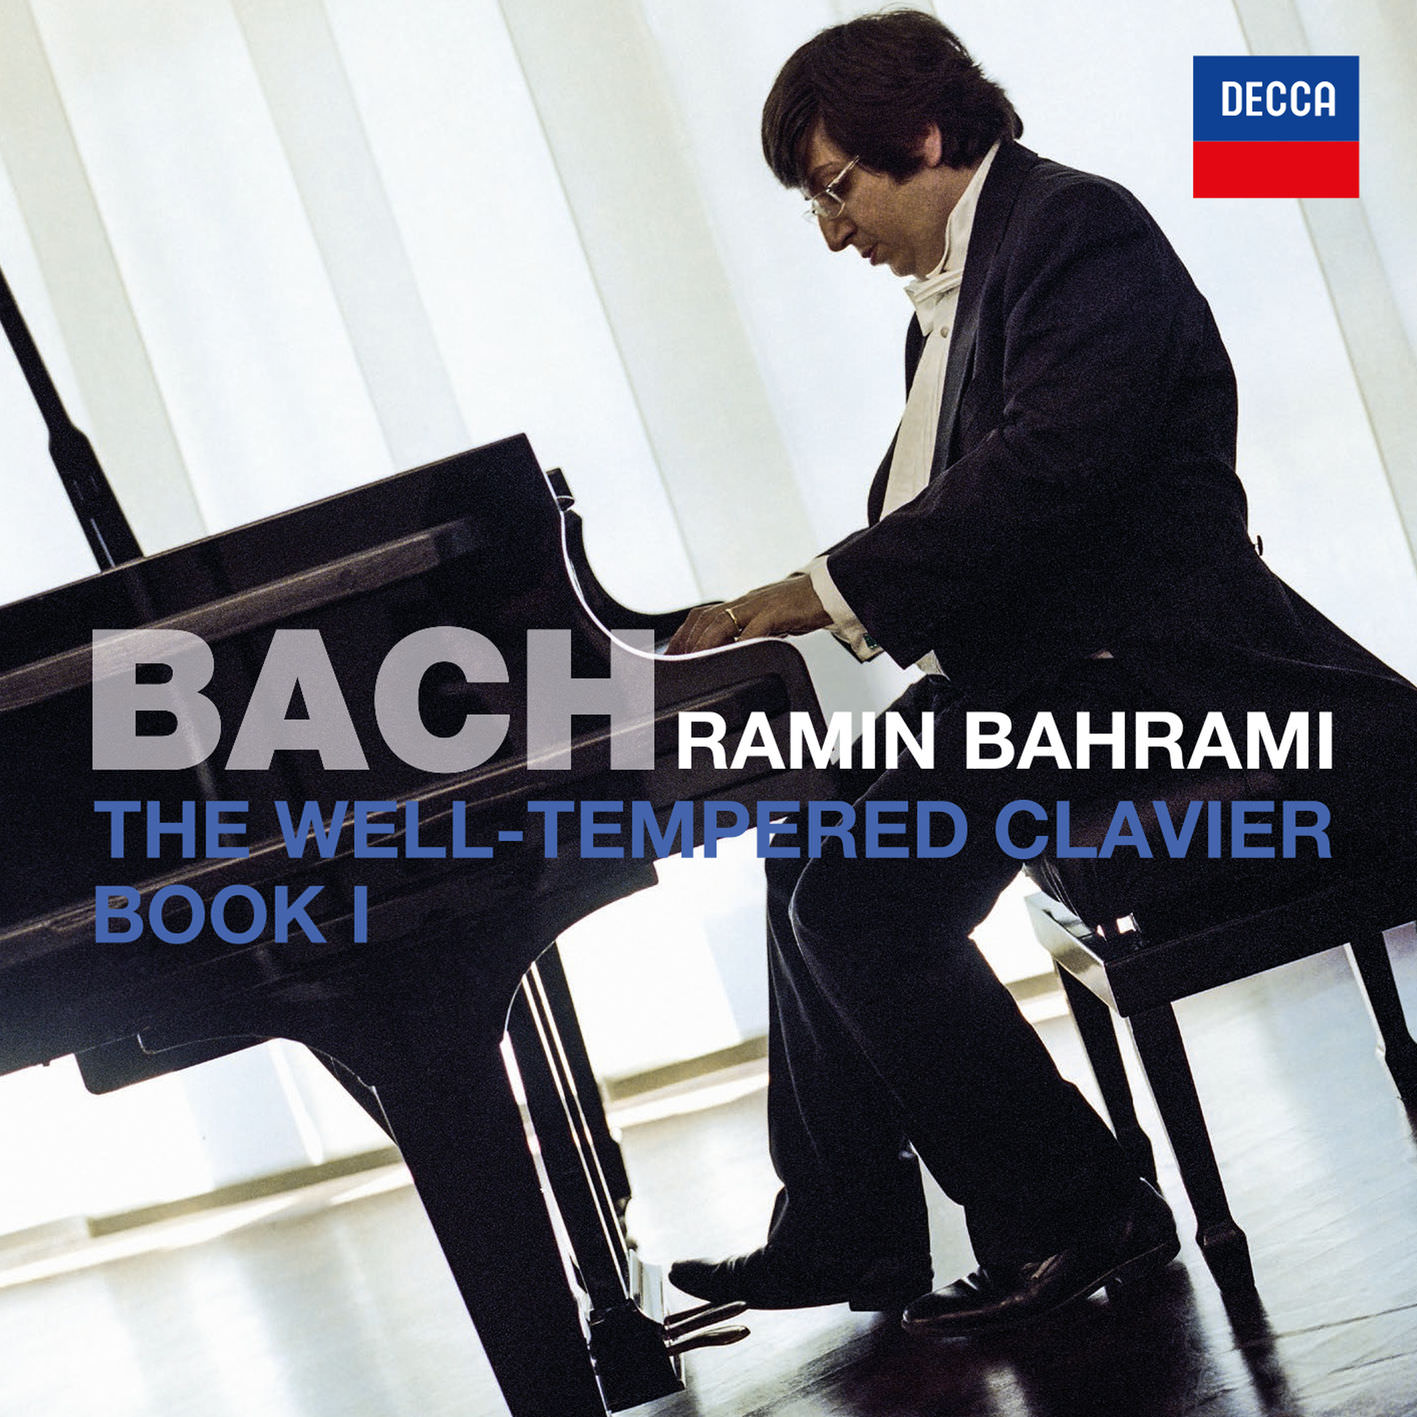 Ramin Bahrami - The Well-Tempered Clavier Book I (2018) [FLAC 24bit/96kHz]